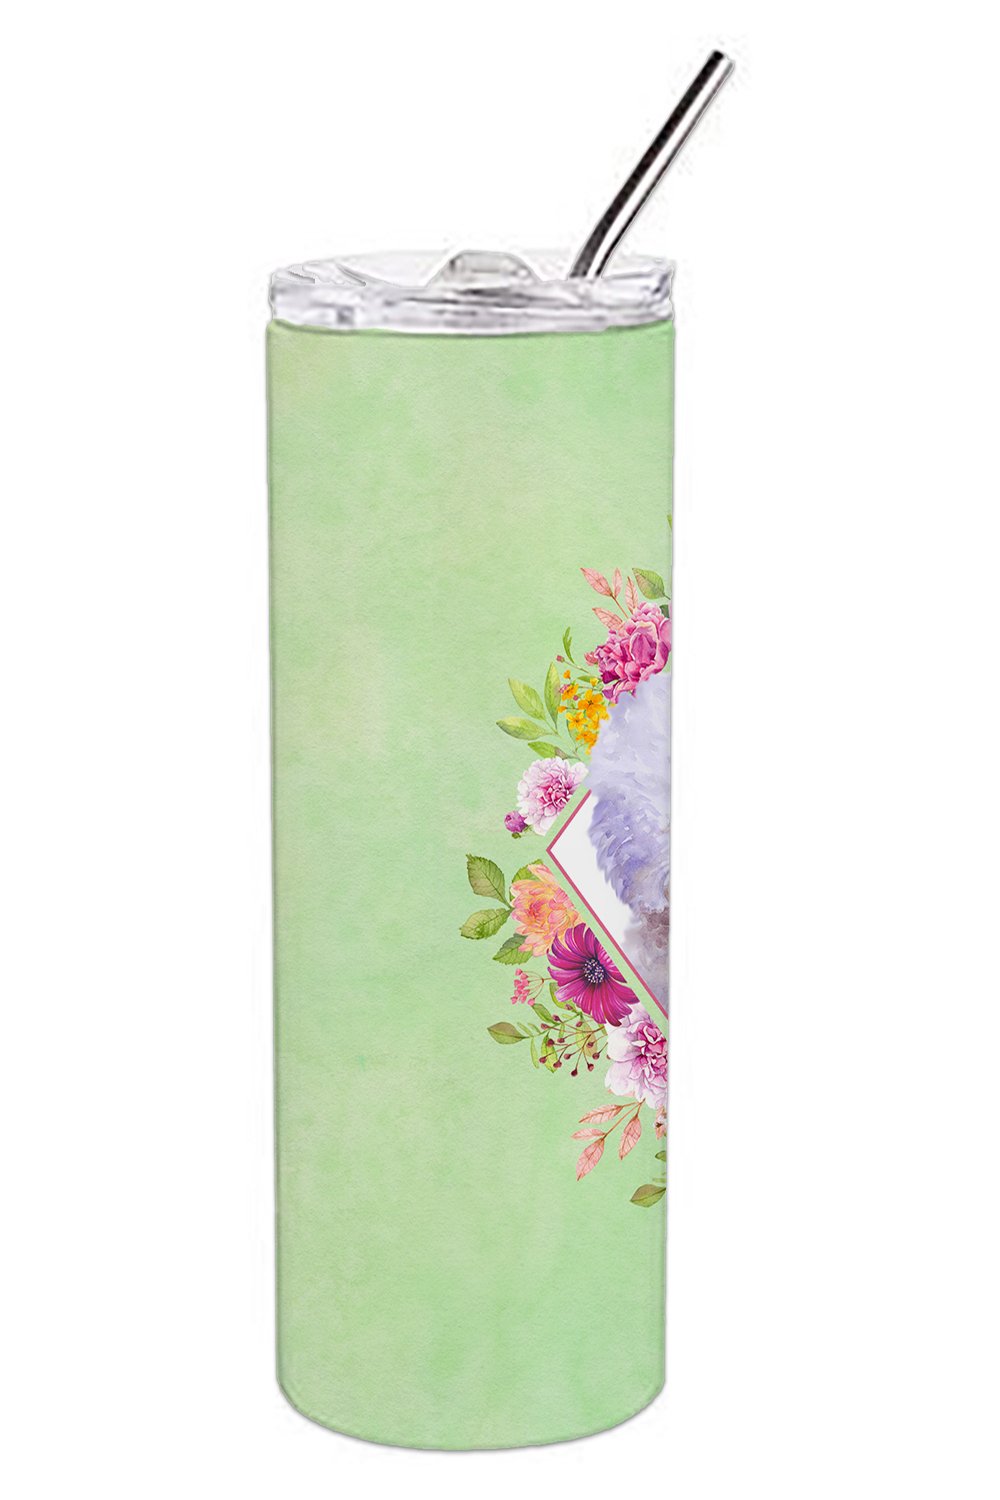 Bichon Frisé #2 Green Flowers Double Walled Stainless Steel 20 oz Skinny Tumbler CK4280TBL20 by Caroline's Treasures